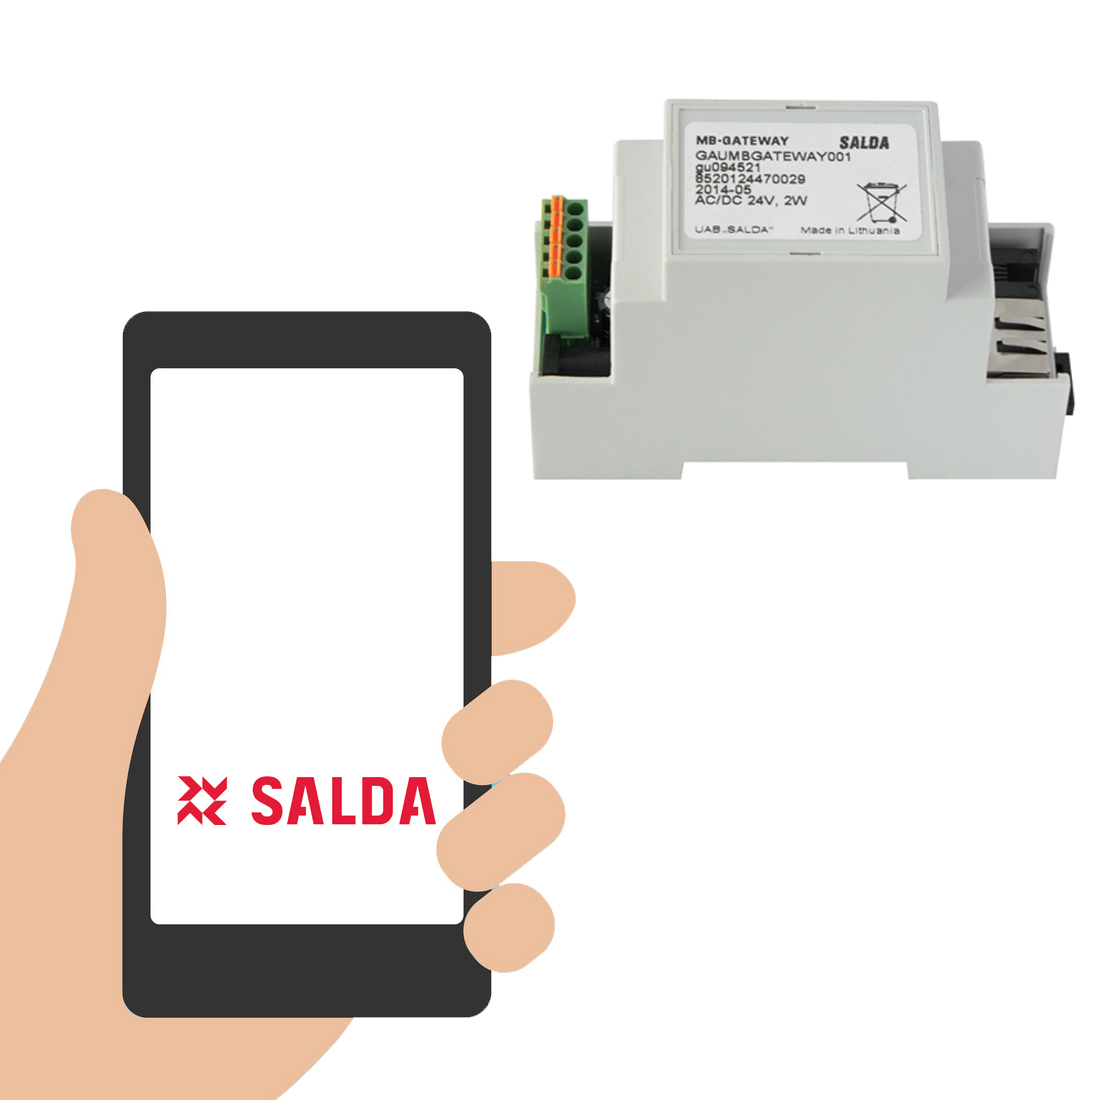 Salda MB Gateway to Connect to Network - AHU000269